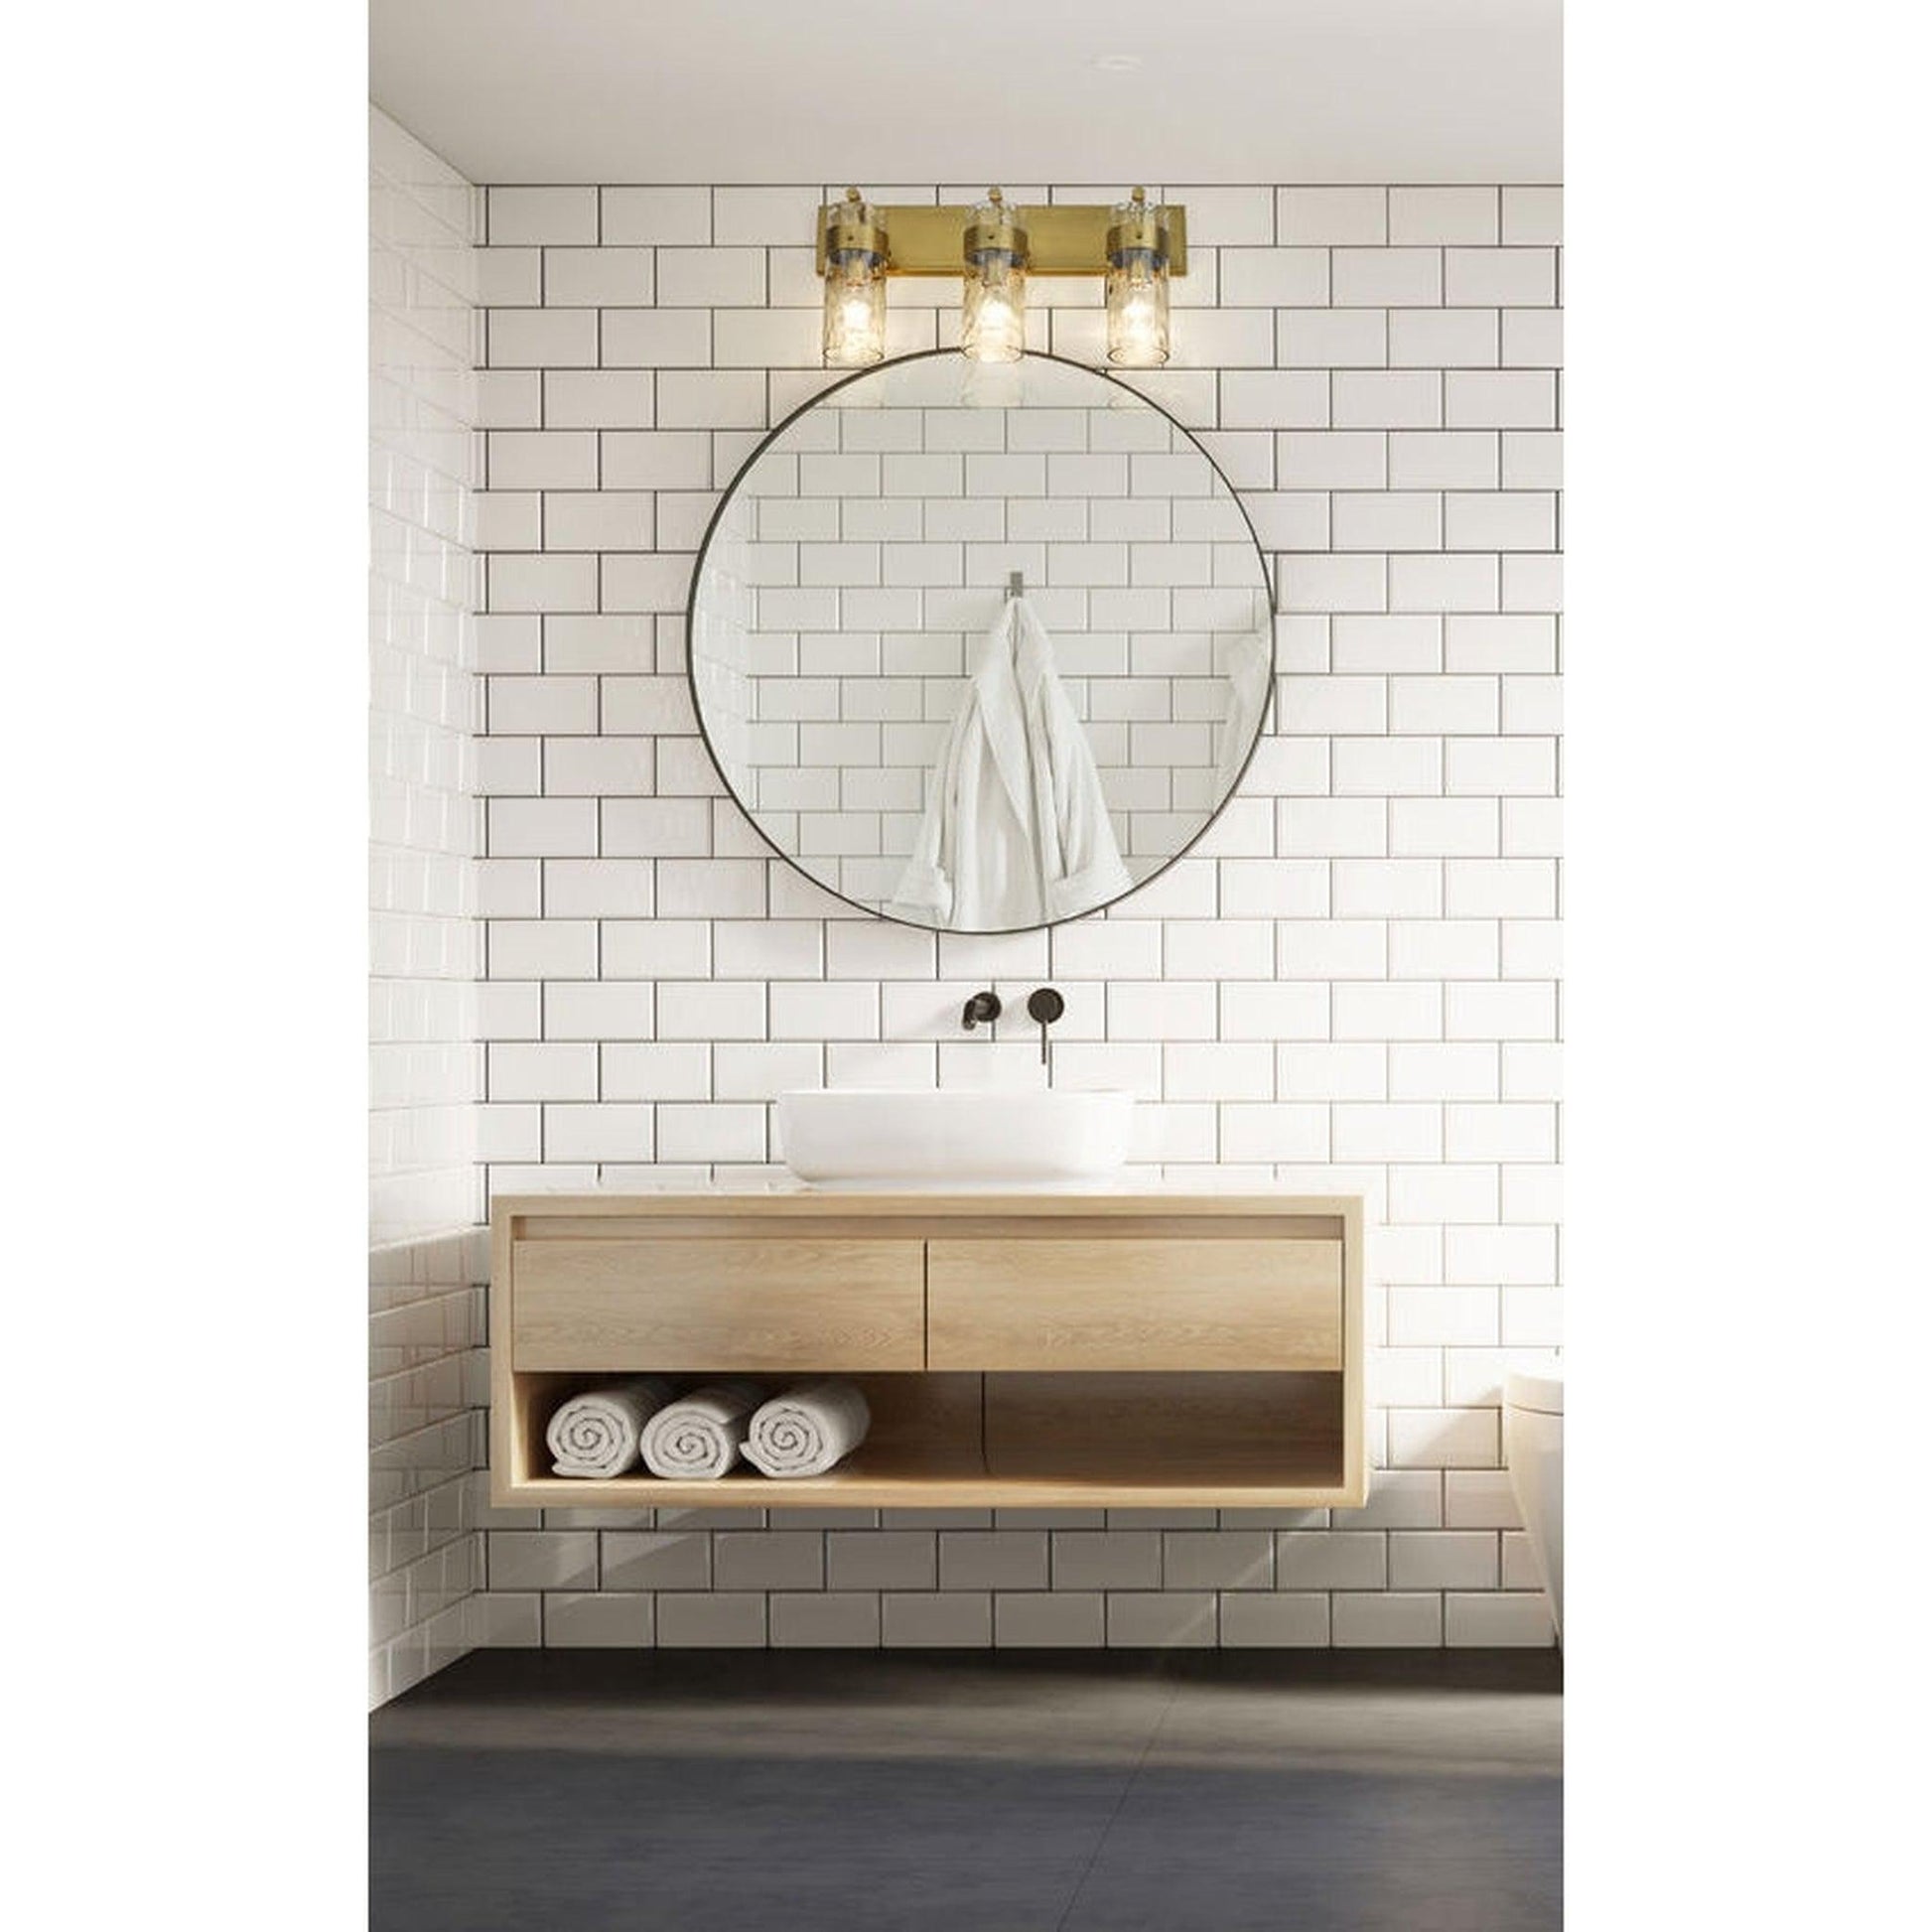 Z-Lite Fontaine 24" 3-Light Rubbed Brass Vanity Light With Clear Glass Shade